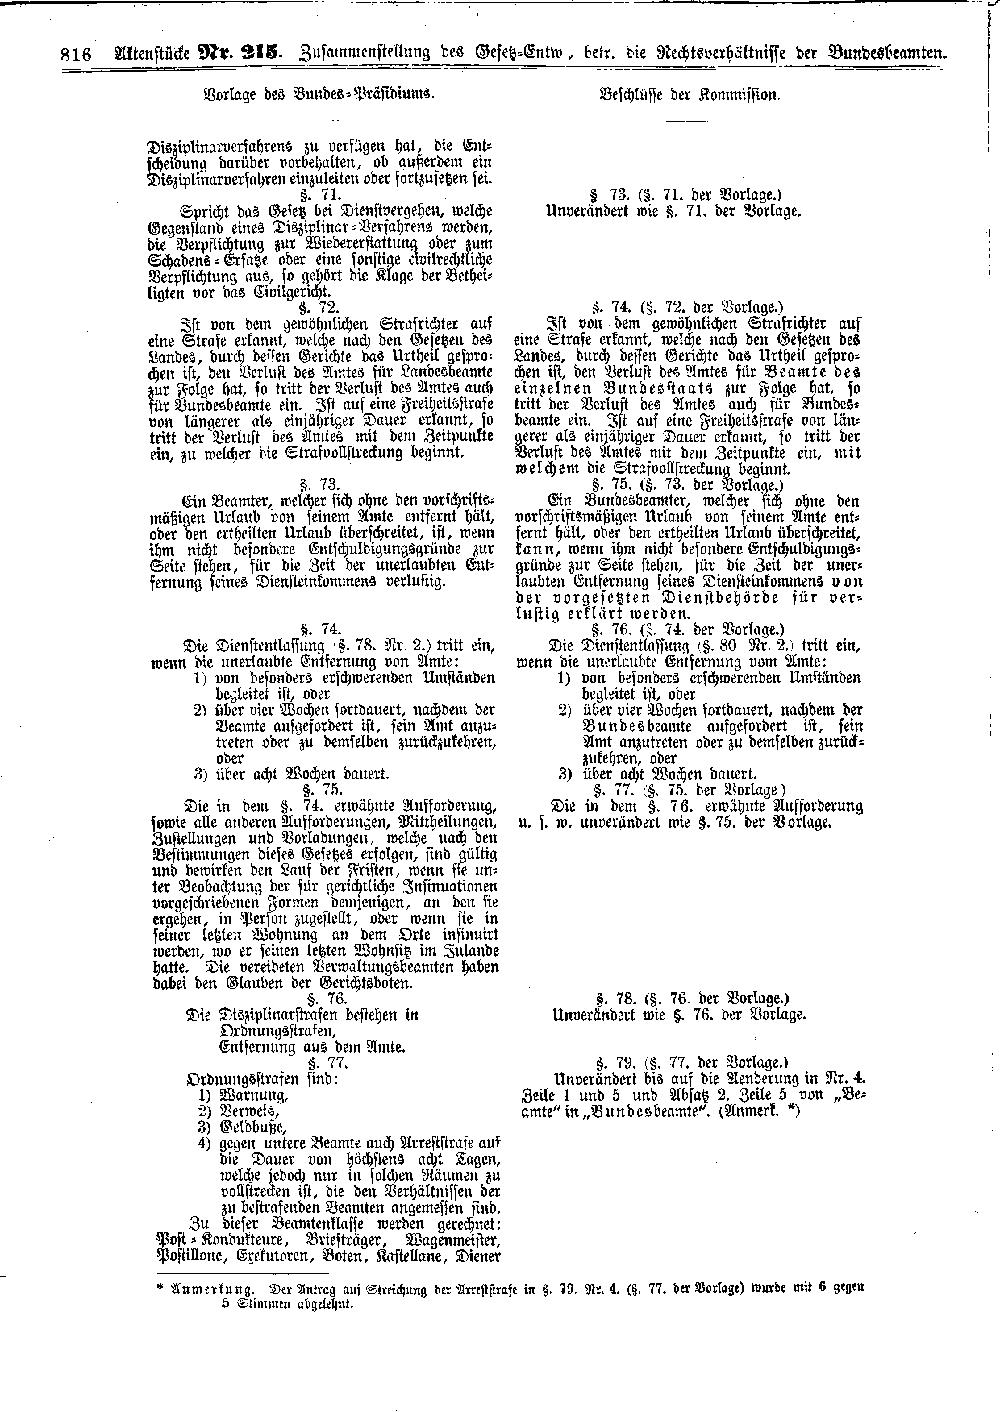 Scan of page 816